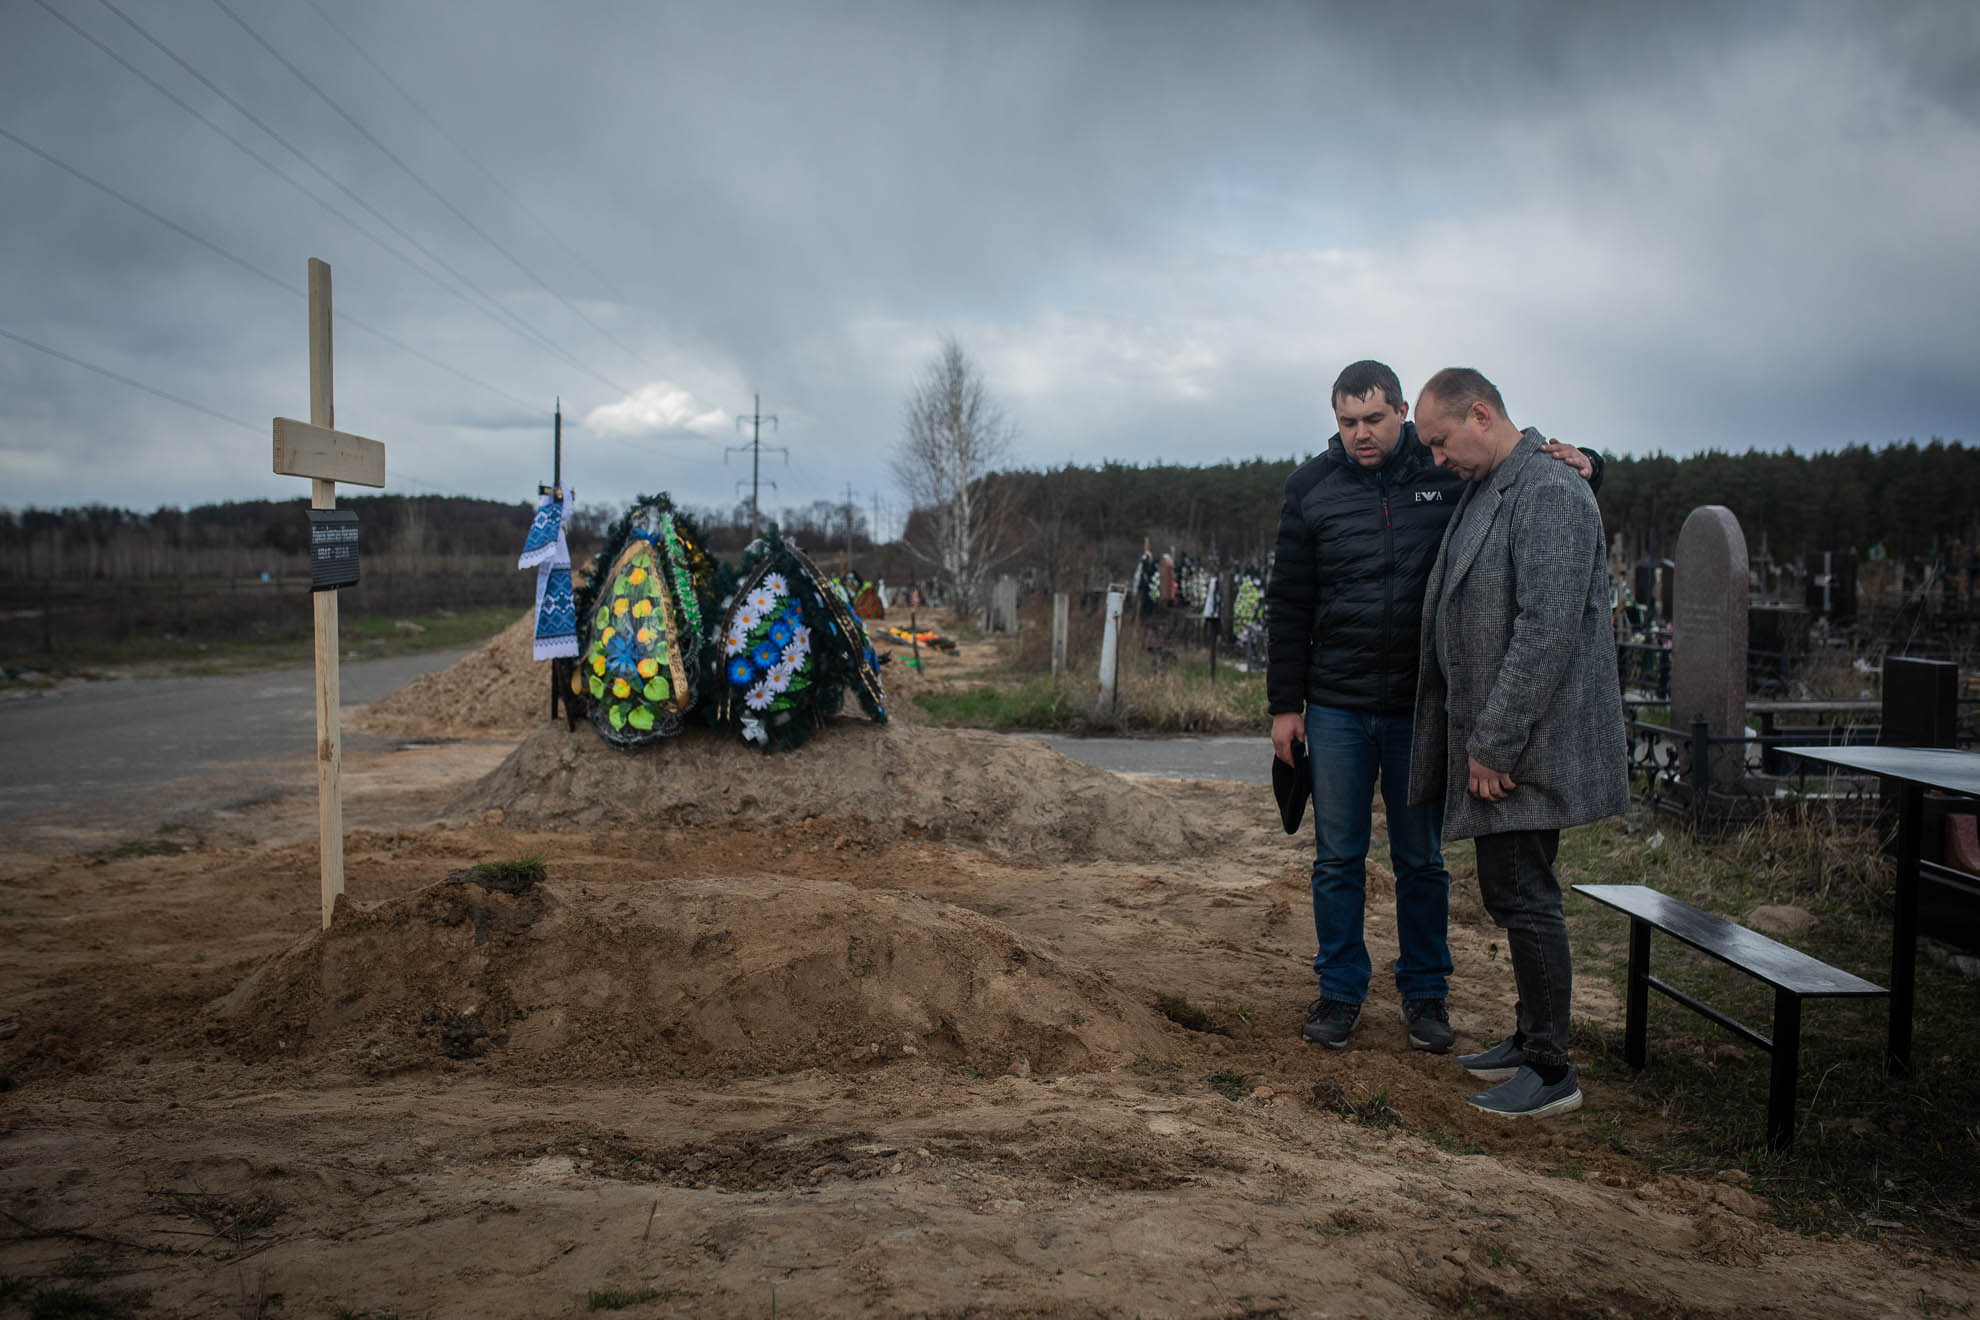 The burial of 82-year-old Valentina on April 12, 2022. The woman died during the Russian occupation in the nursing home where she lived. After the withdrawal of the troops, the bodies of six of its residents, including Valentina's, were found in the facility. In front of her grave is her son, Anatoliy. He said that at all times the nursing home workers tried to take care of the elderly. But due to the lack of electricity, water, gas, and medicines, and taking into account the precarious health of these people, they gradually died.